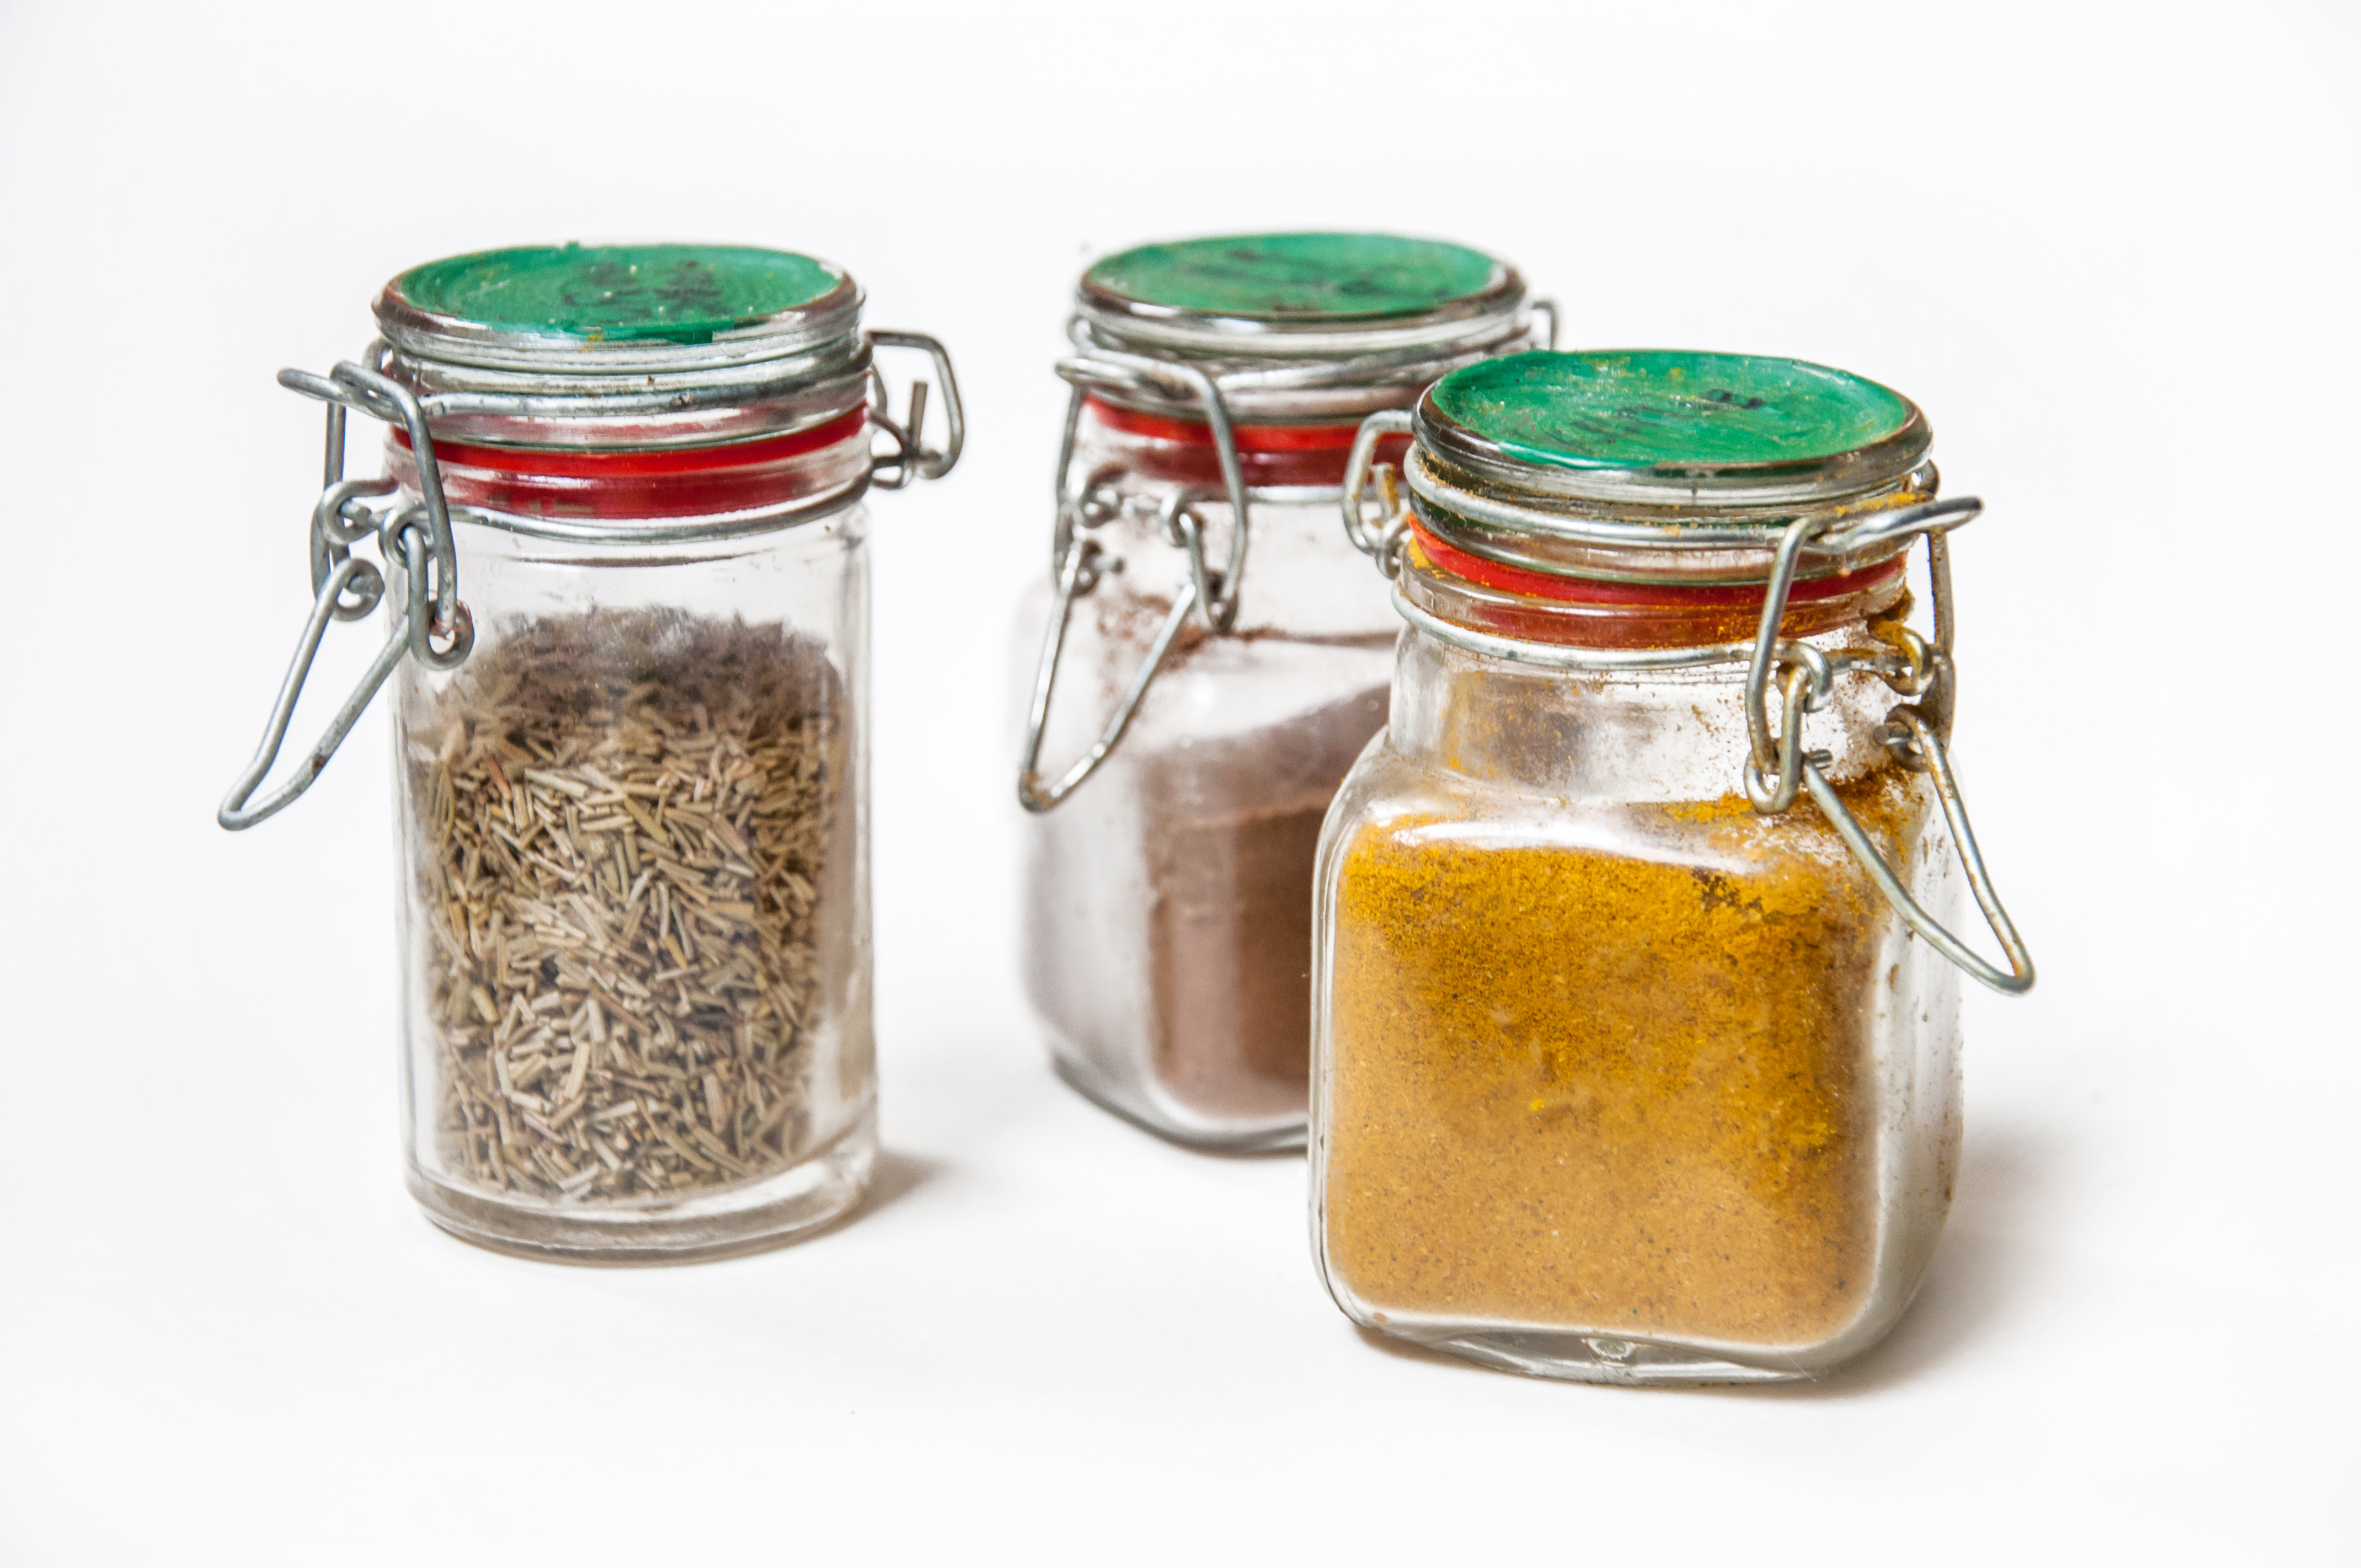 Spices and herbs in jars, Aniseed, Reflection, Kitchenware, Leaf, HQ Photo